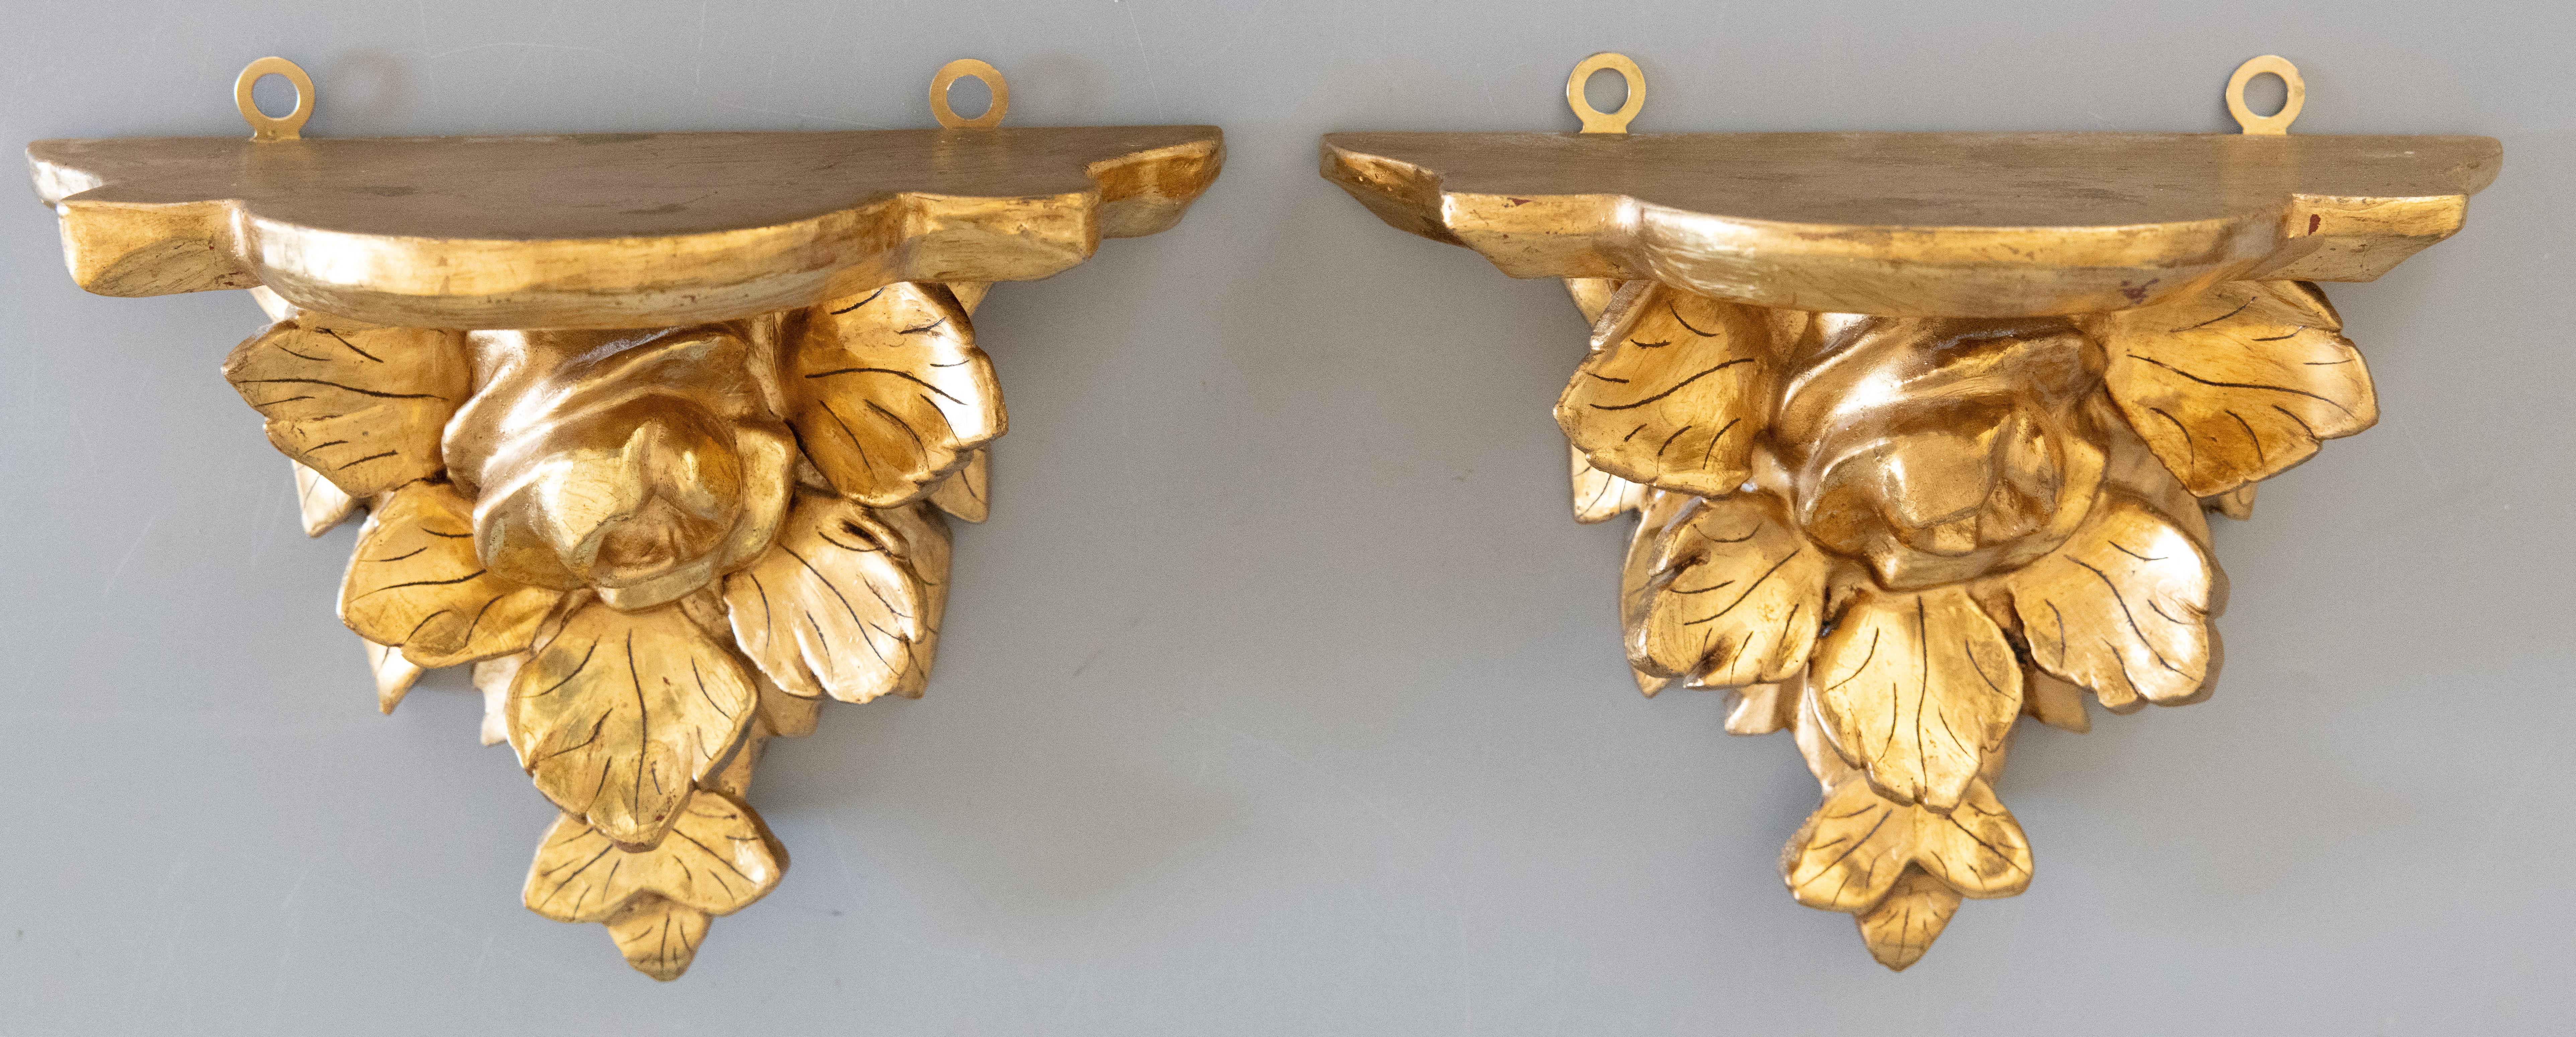 Hollywood Regency Pair of Italian Giltwood Roses Wall Brackets Shelves, circa 1940 For Sale